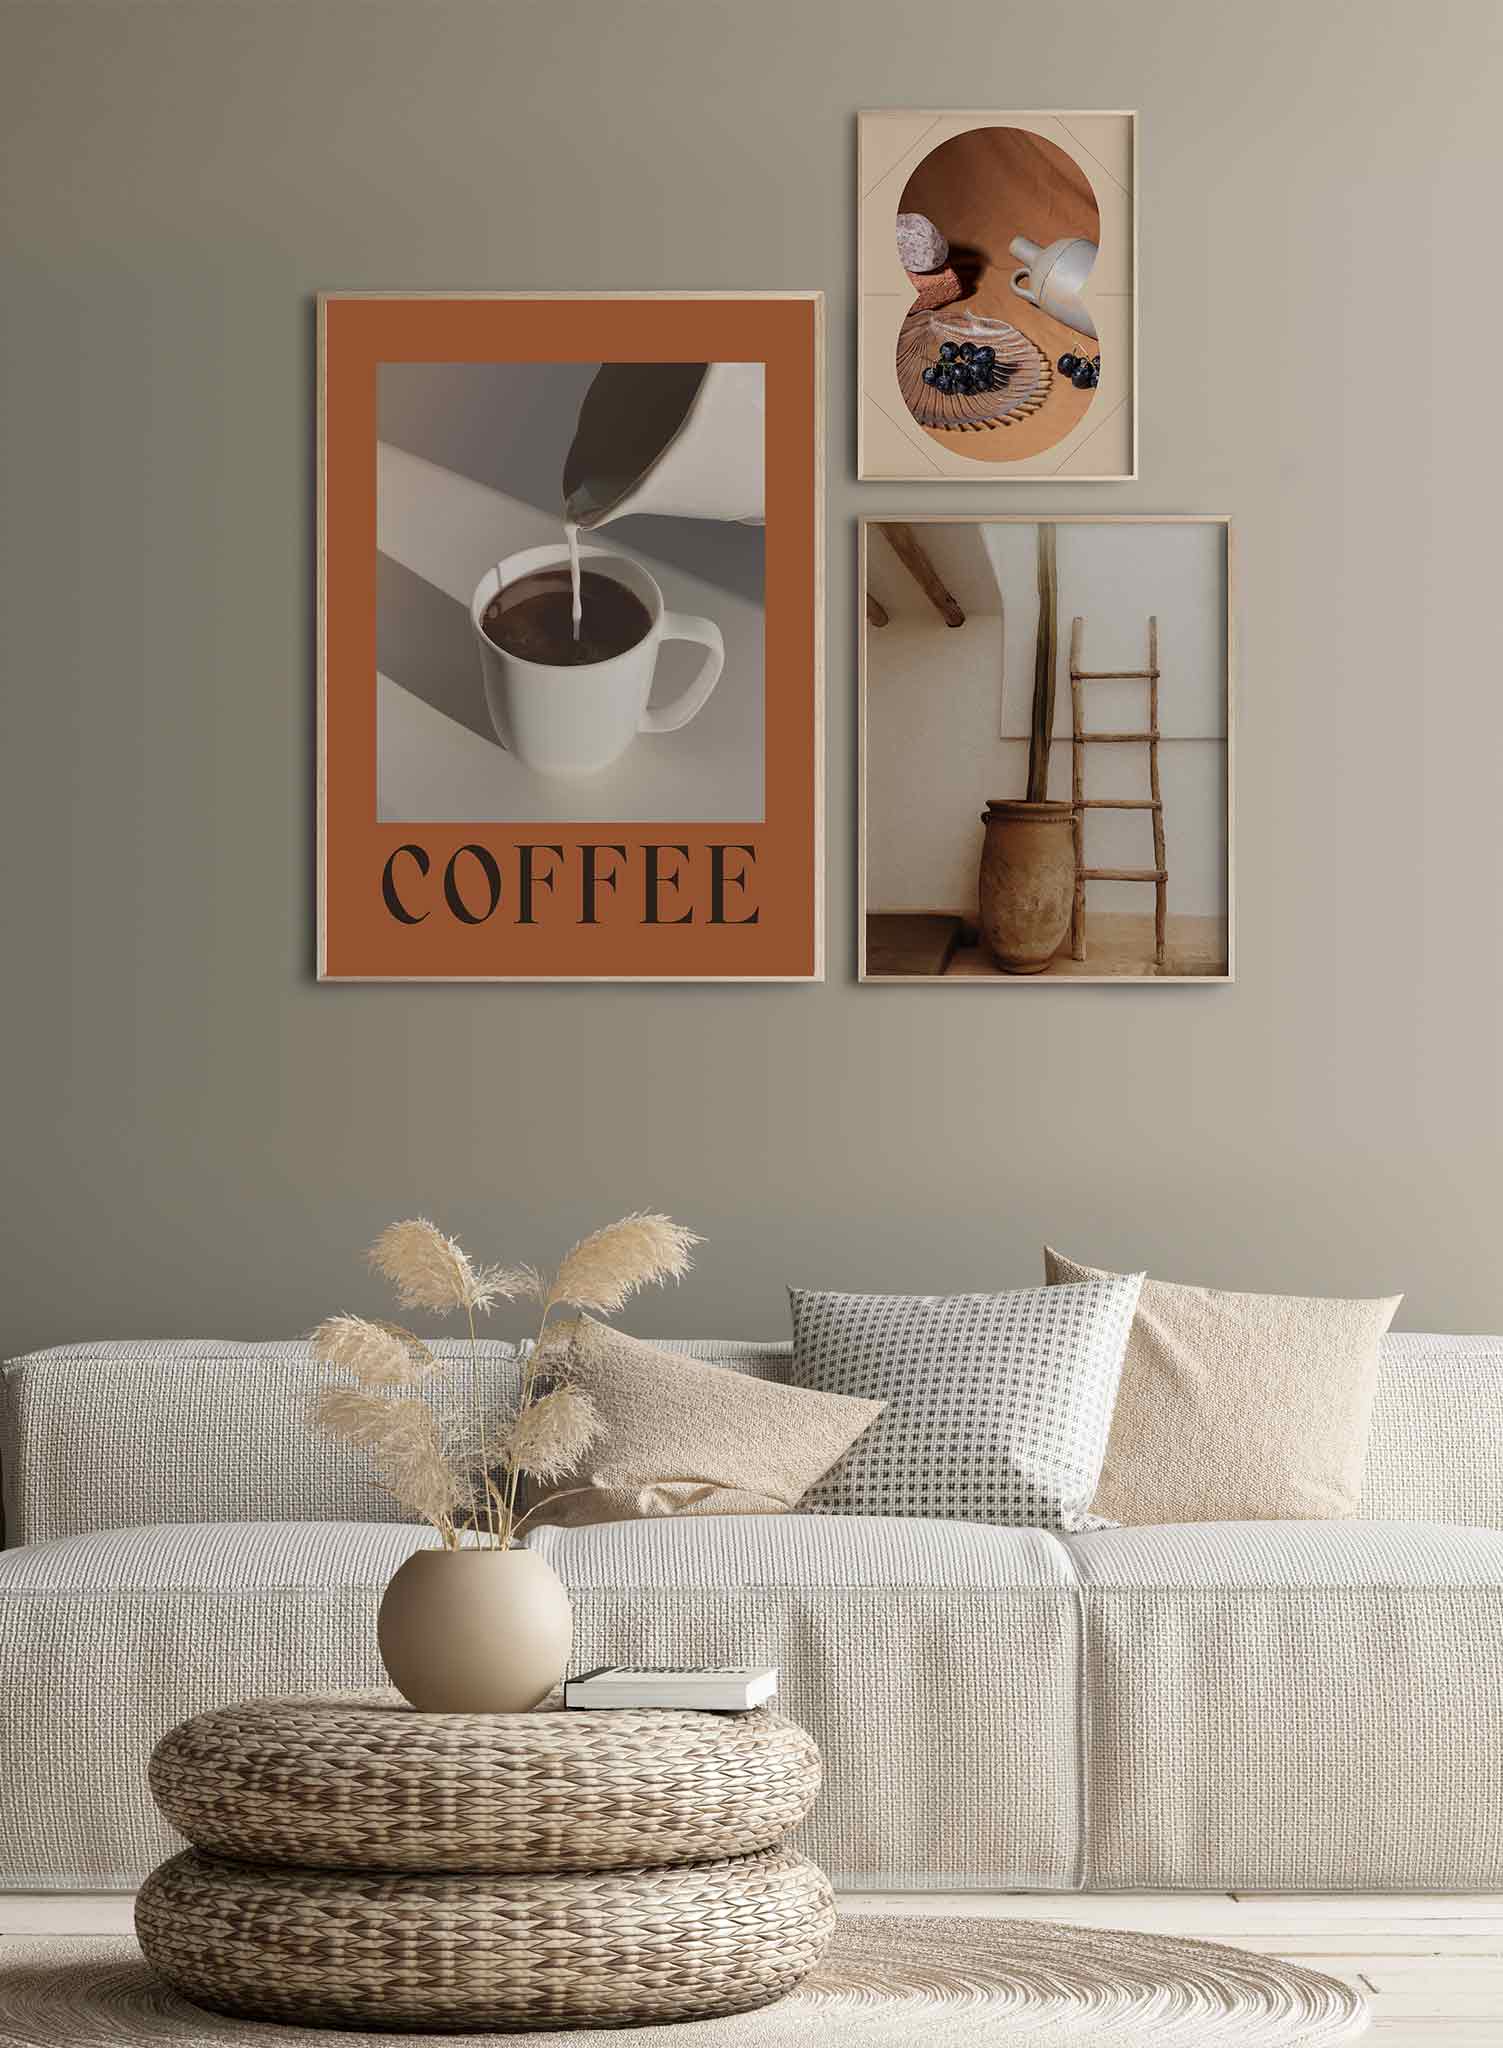 Milk & Coffee is a coffee photography collage poster by Opposite Wall.